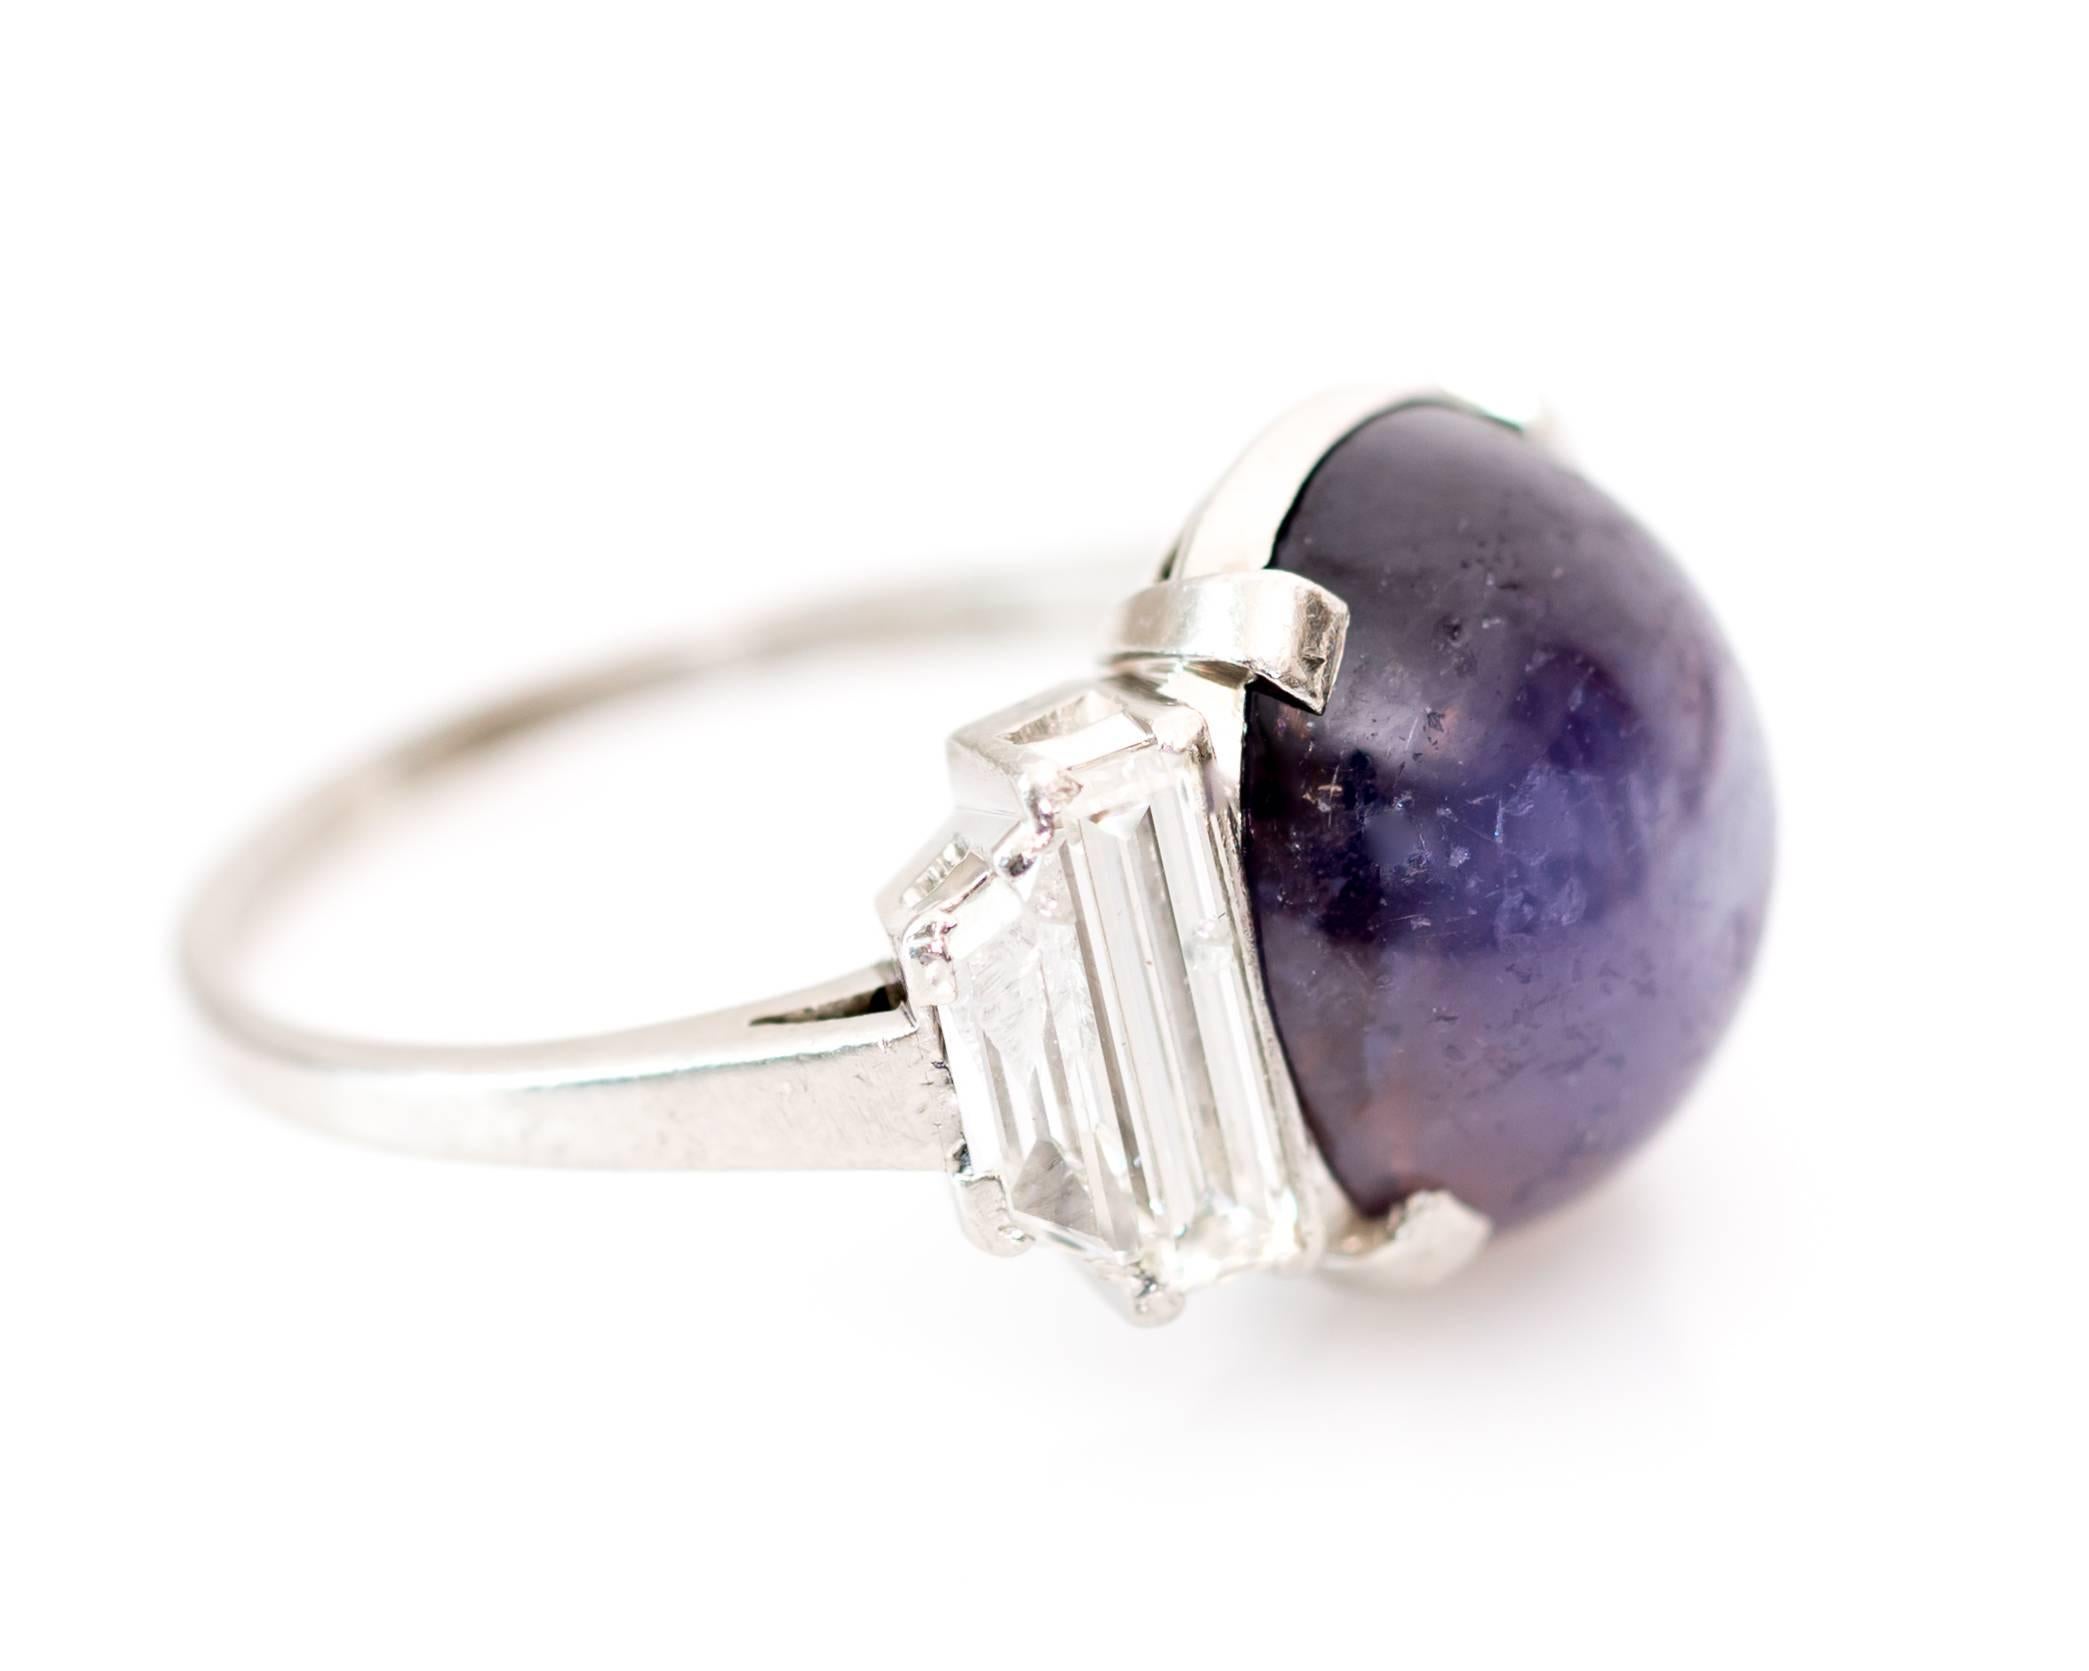 This stunning Star Sapphire Cabochon and Diamond Cocktail Ring is perfect for everyday wear! Baguette diamonds totaling .8 carats flank a prong set bluish-purplish 5 carat star sapphire cabochon which reveals a striking star radiating from the